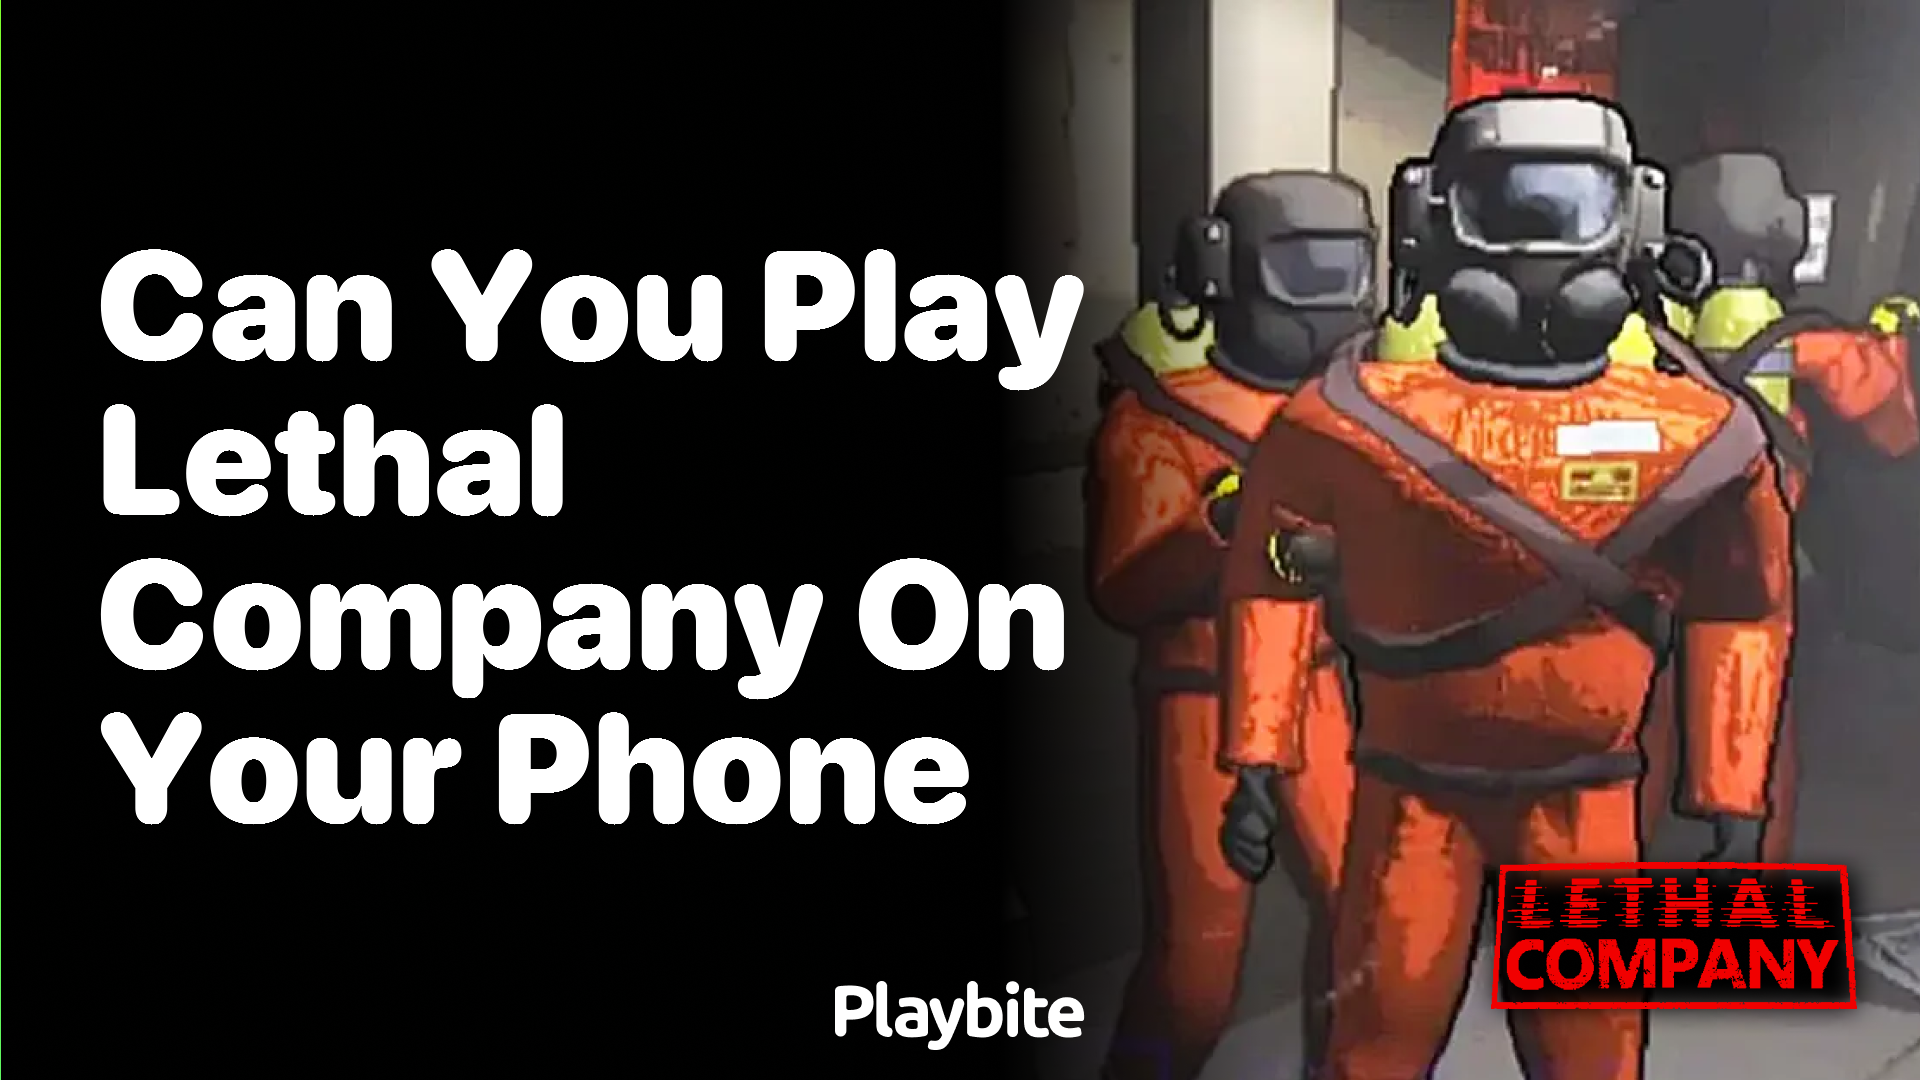 Can You Play Lethal Company on Your Phone?